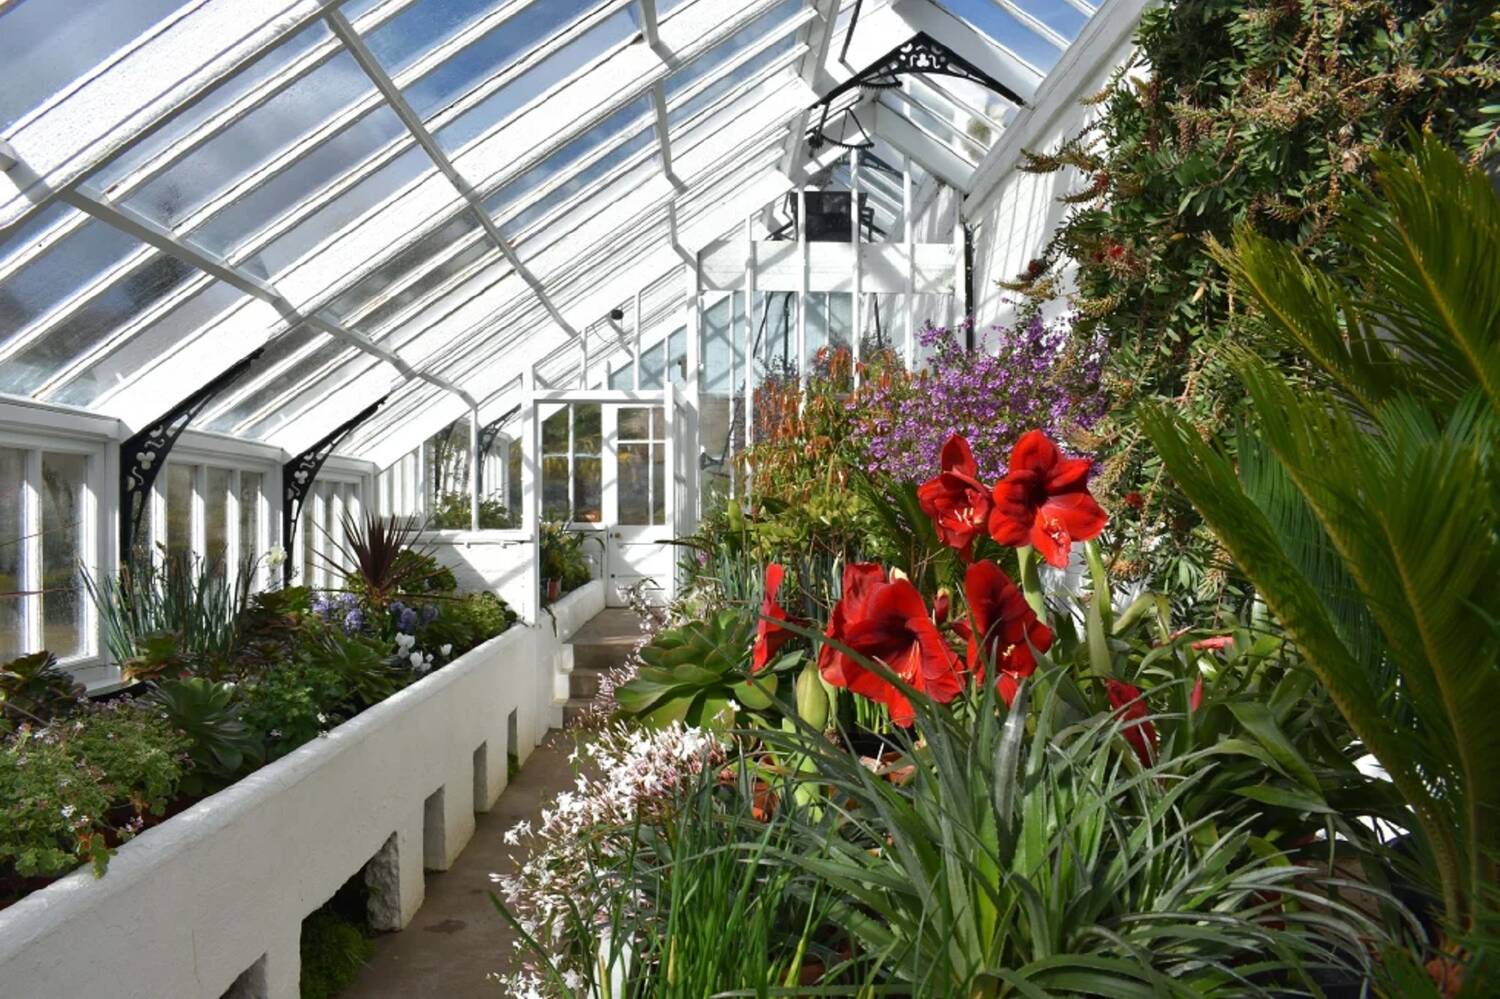 A view inside a glasshouse with a white wooden frame and many glass panels in the roof and walls. Inside are a variety of potted plants, including one with bright red flowers in the foreground.